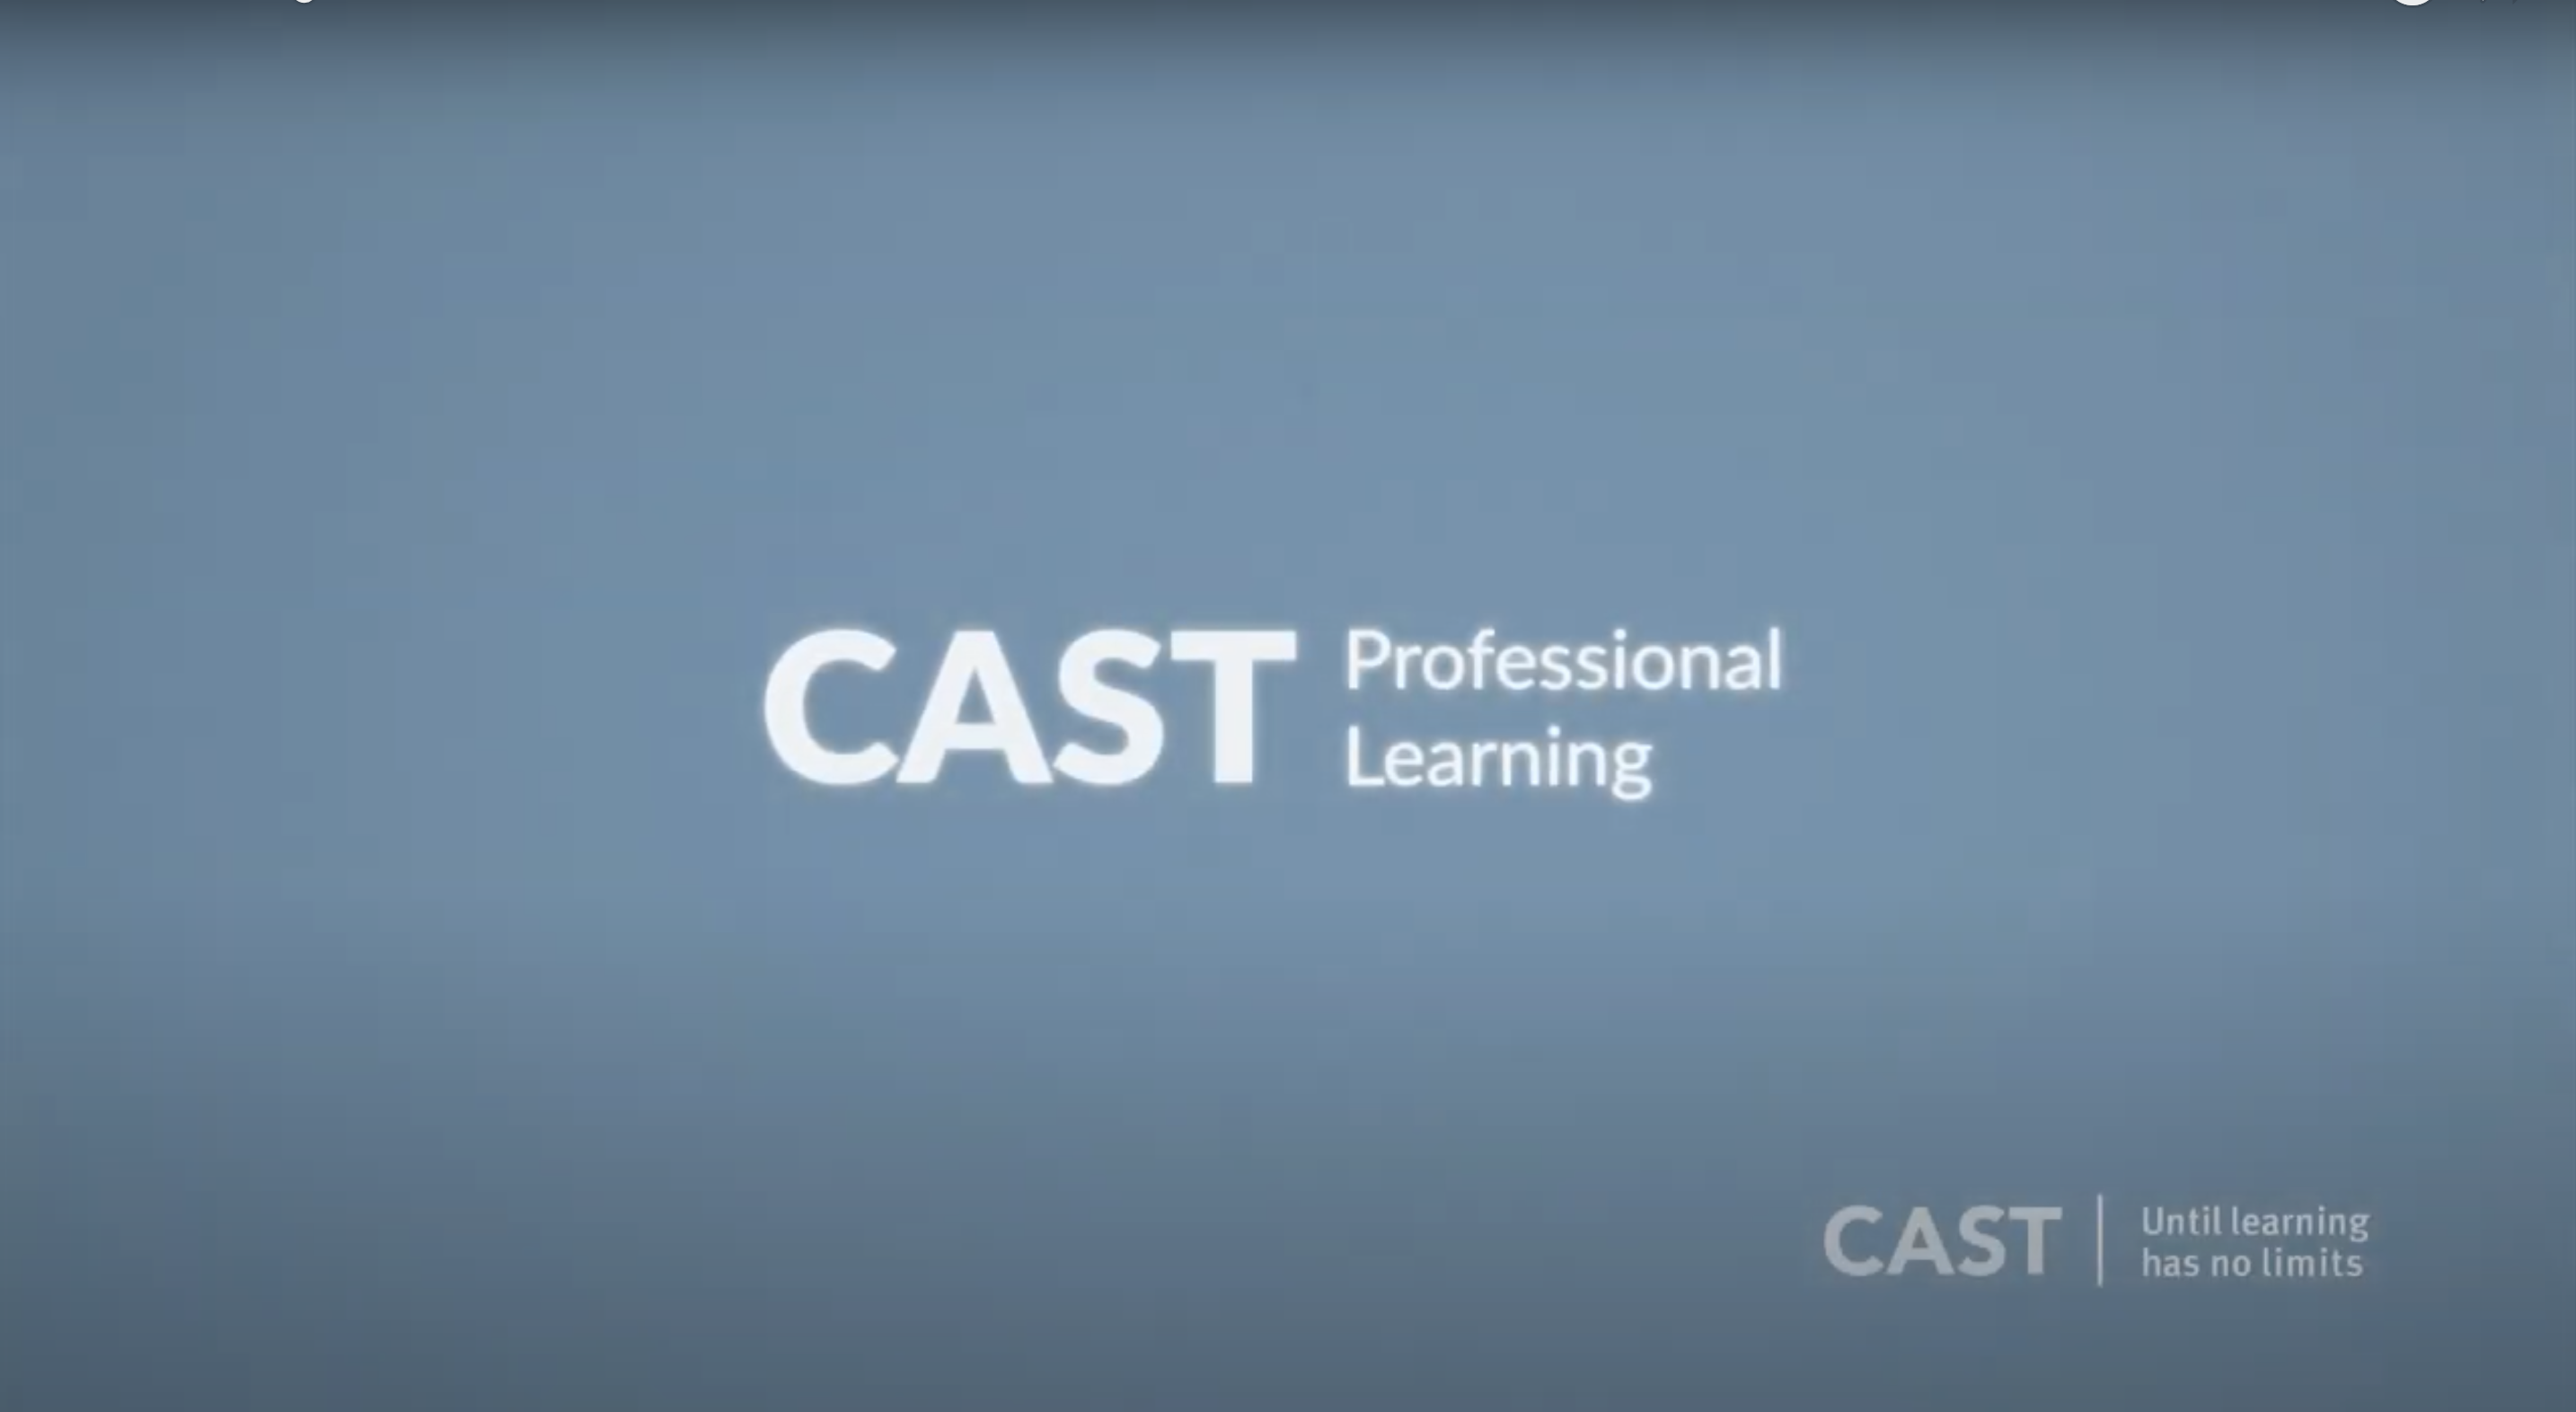 CAST - Professional Learning